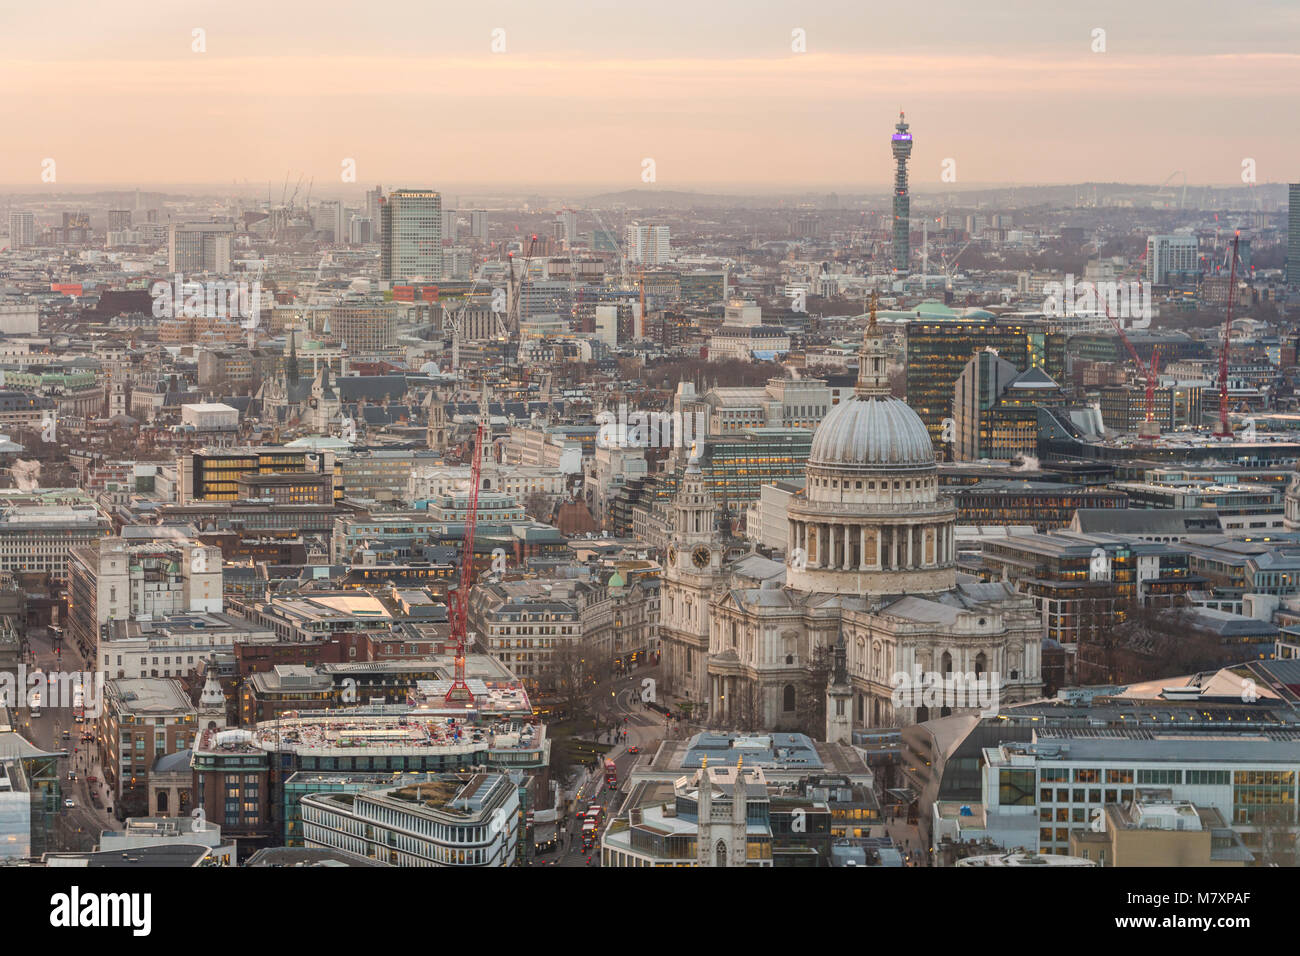 LONDON, UK – JAN 2018:  View of St. Paul's Cathedral and London from above with BT tower in distance Stock Photo